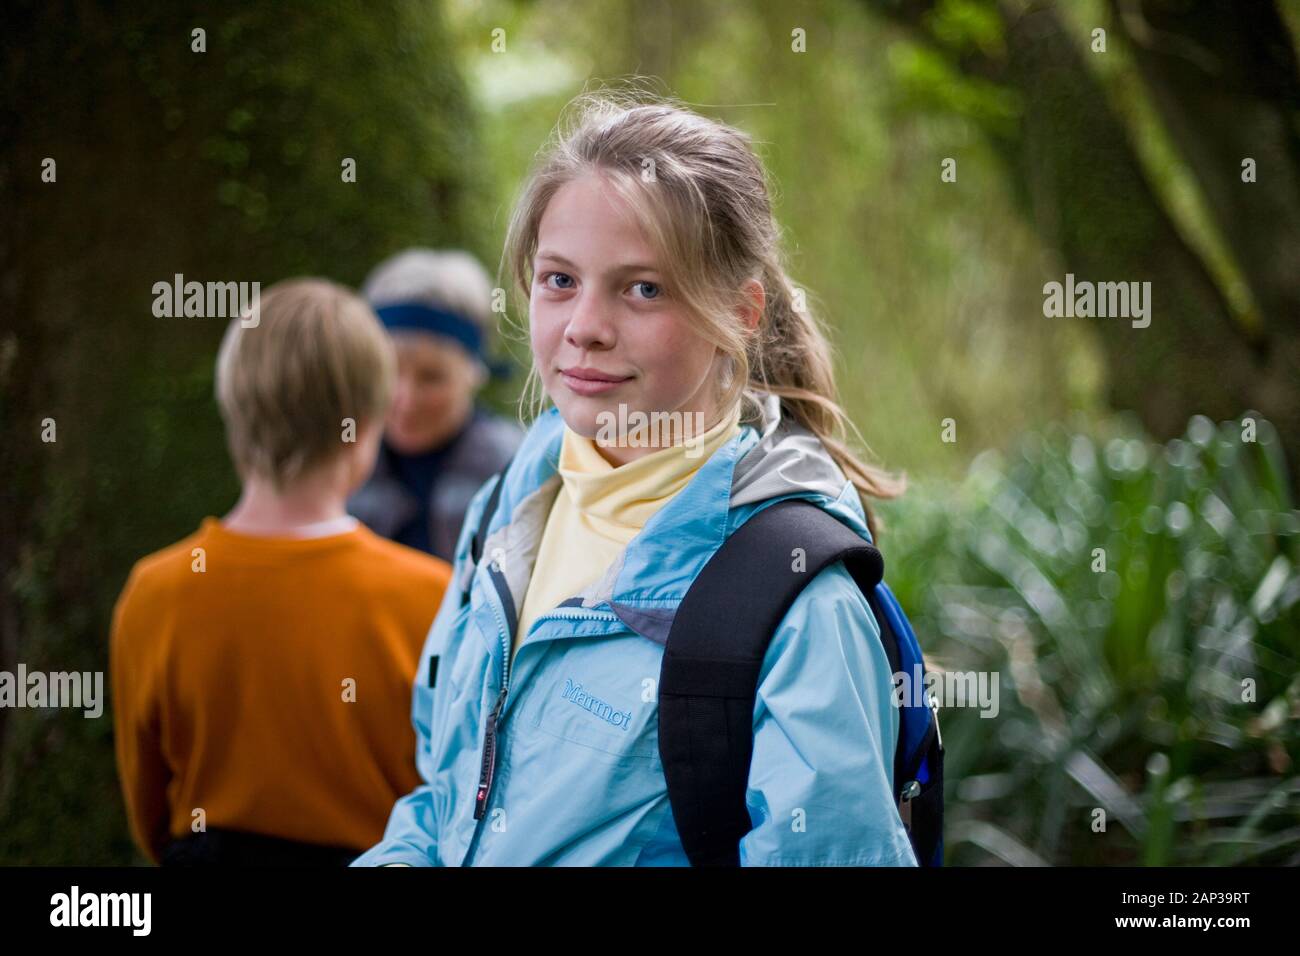 Girl hiking with family Stock Photo